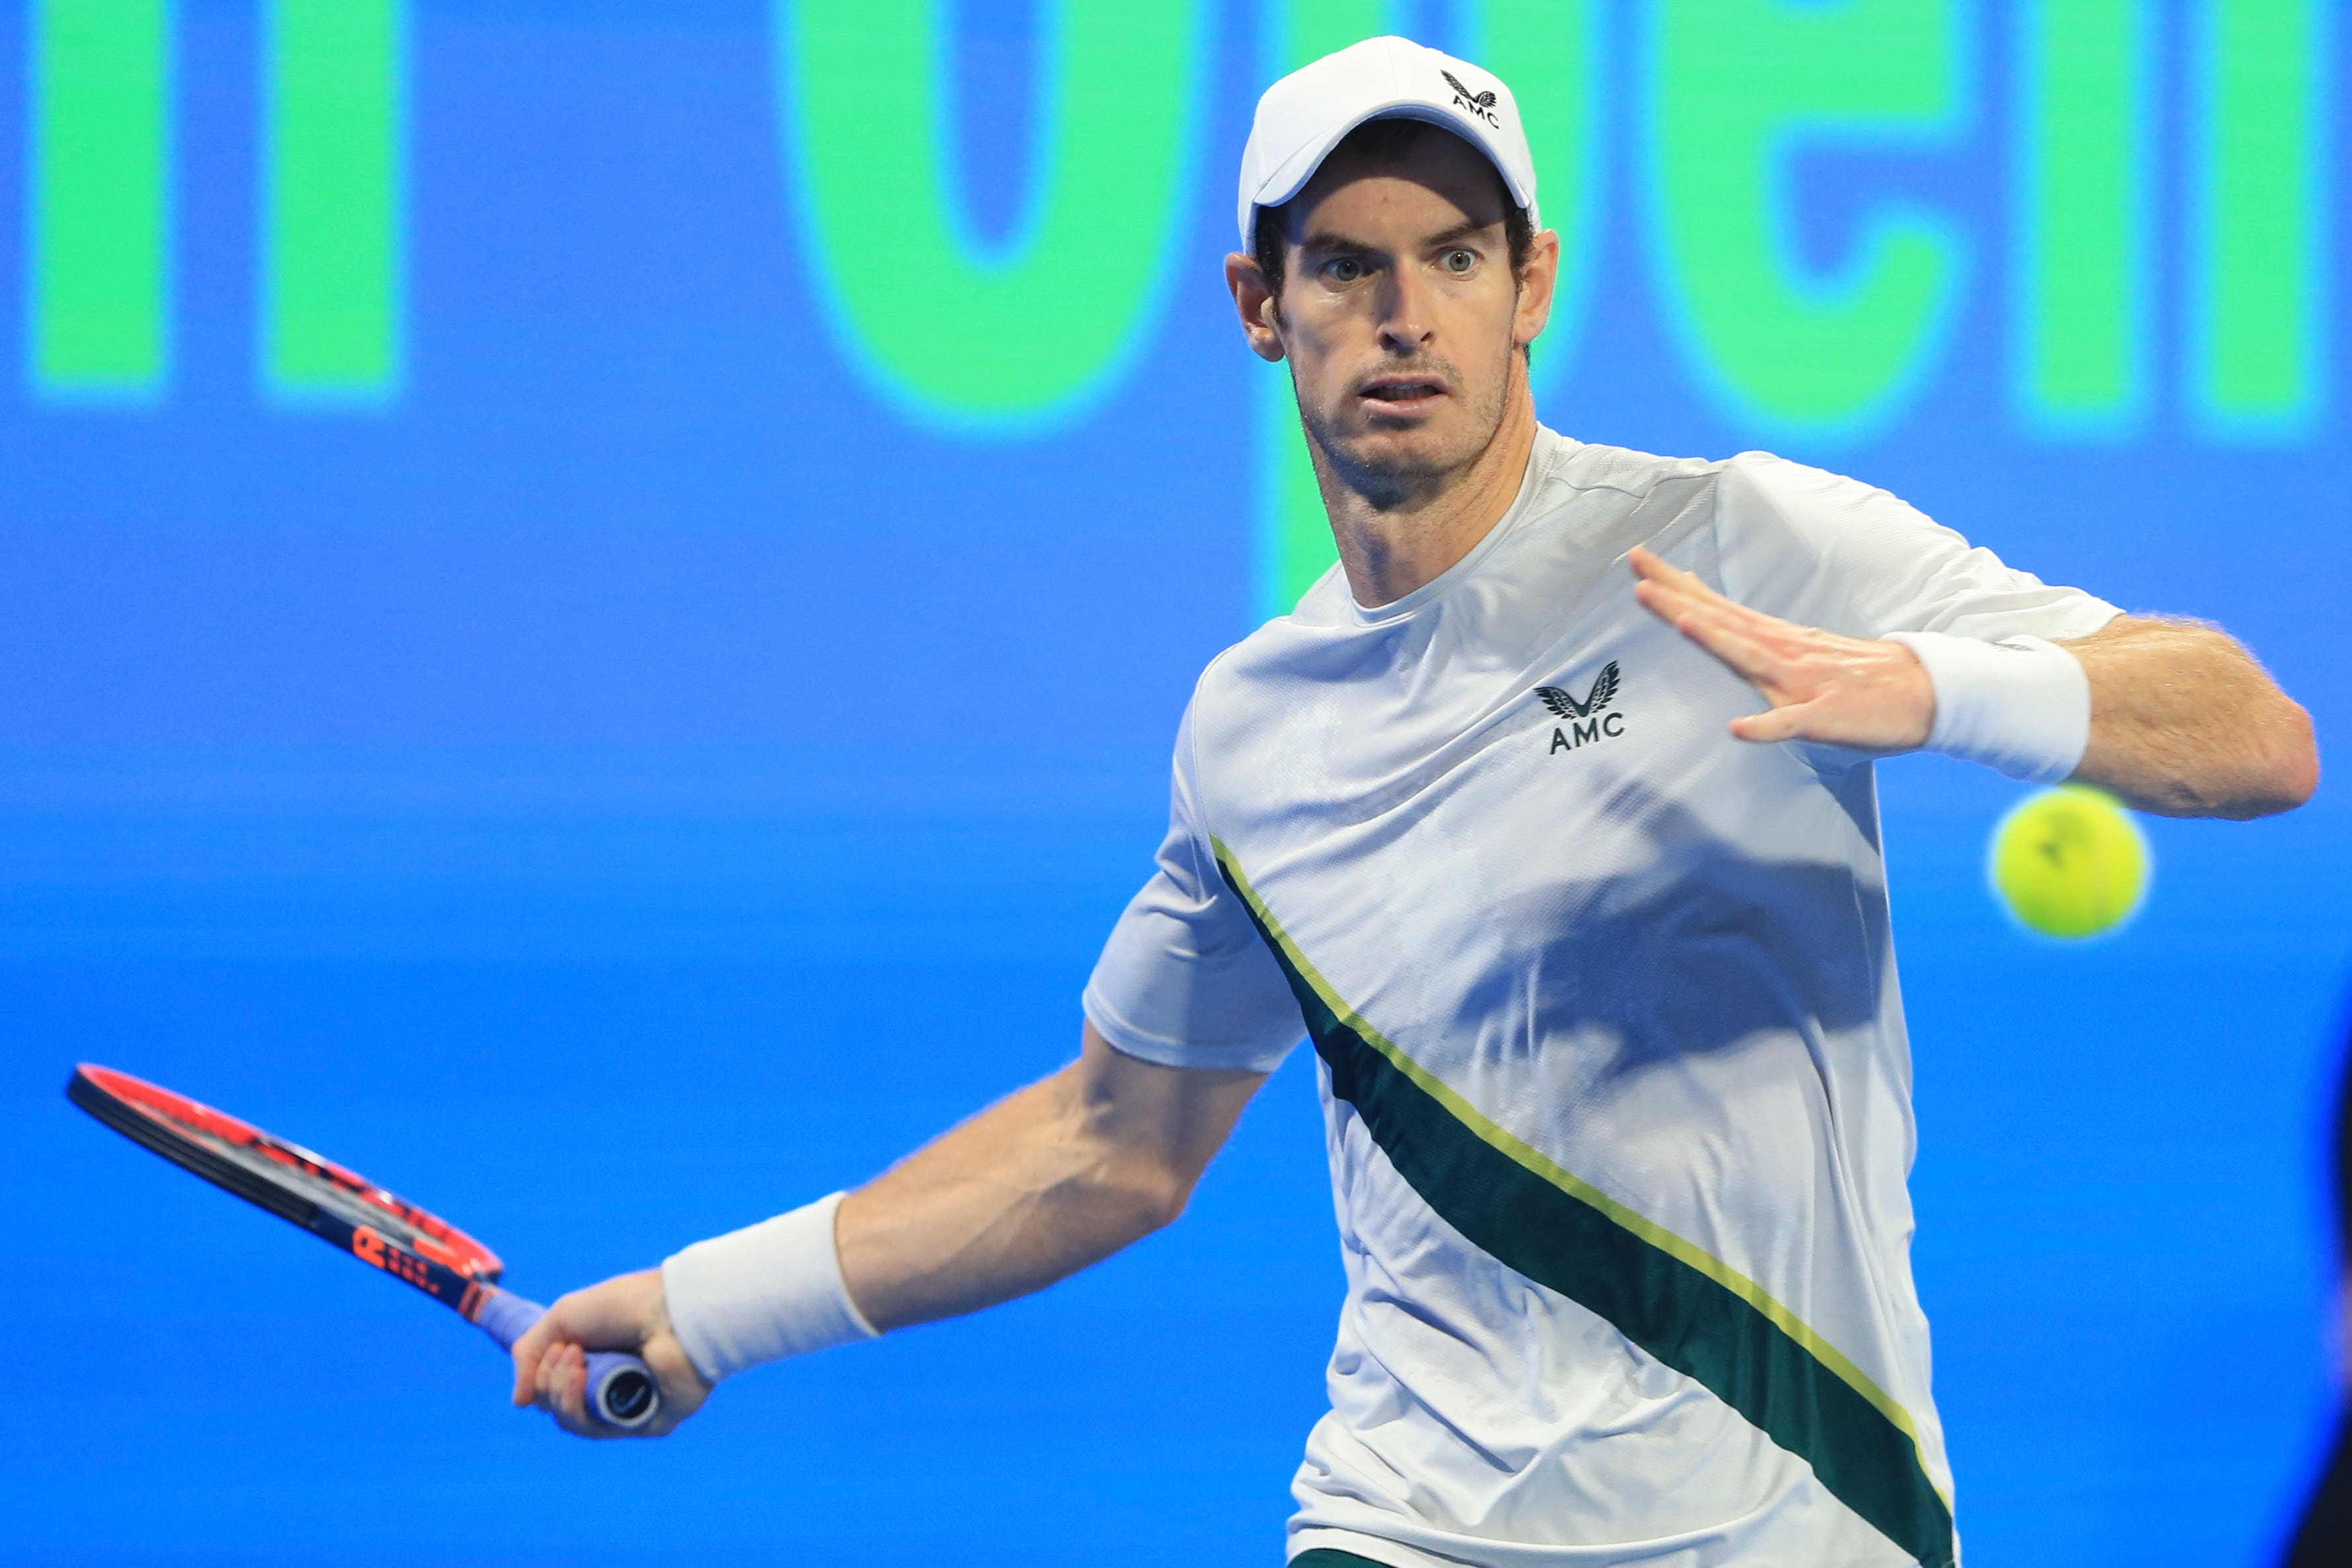 Dubai tennis: All eyes will be on British ace Andy Murray after